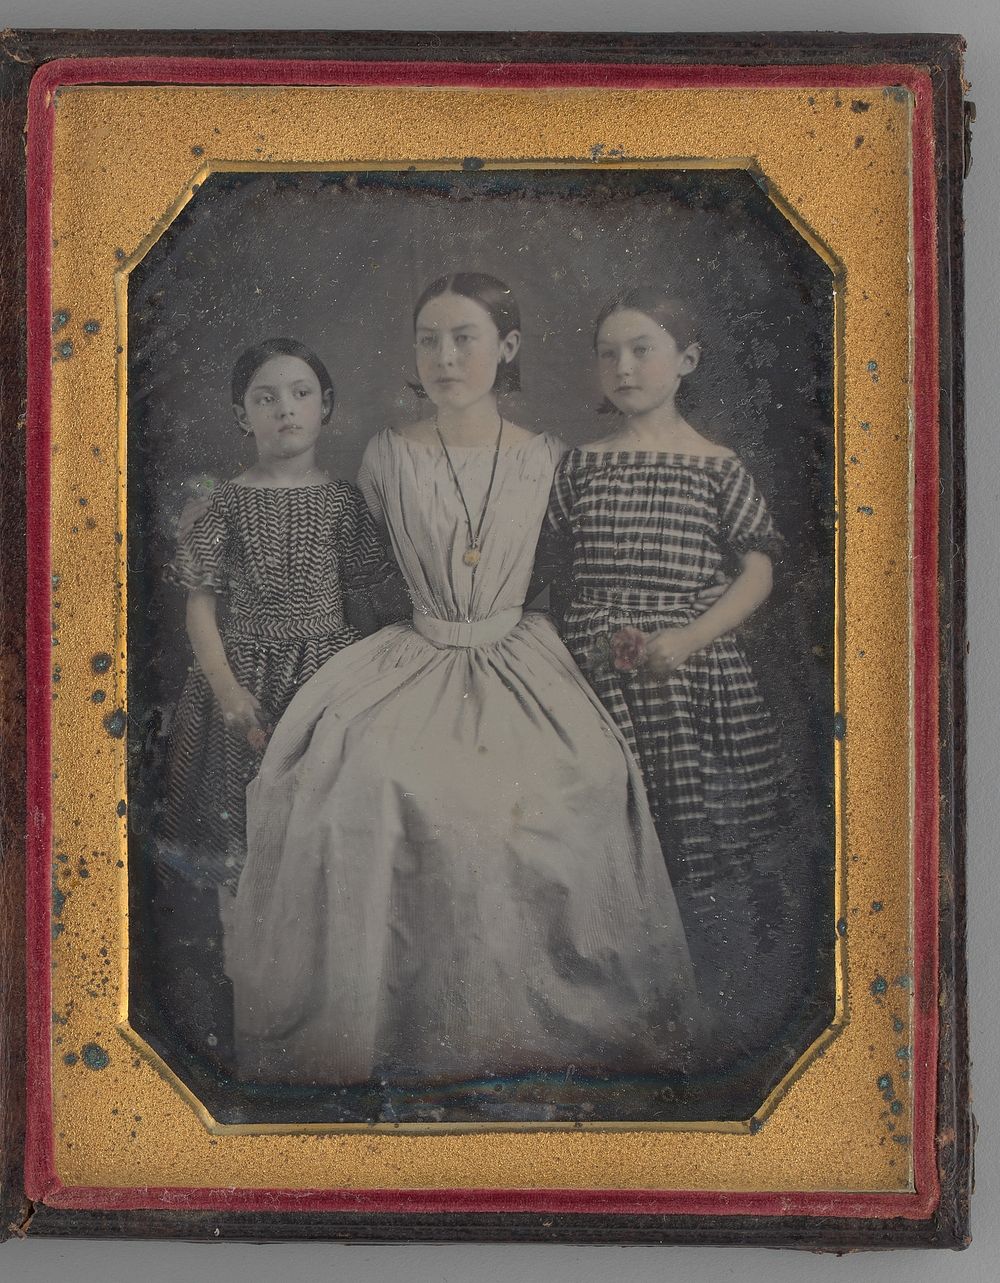 Untitled (Portrait of a Woman with Two Girls) by Unknown Maker